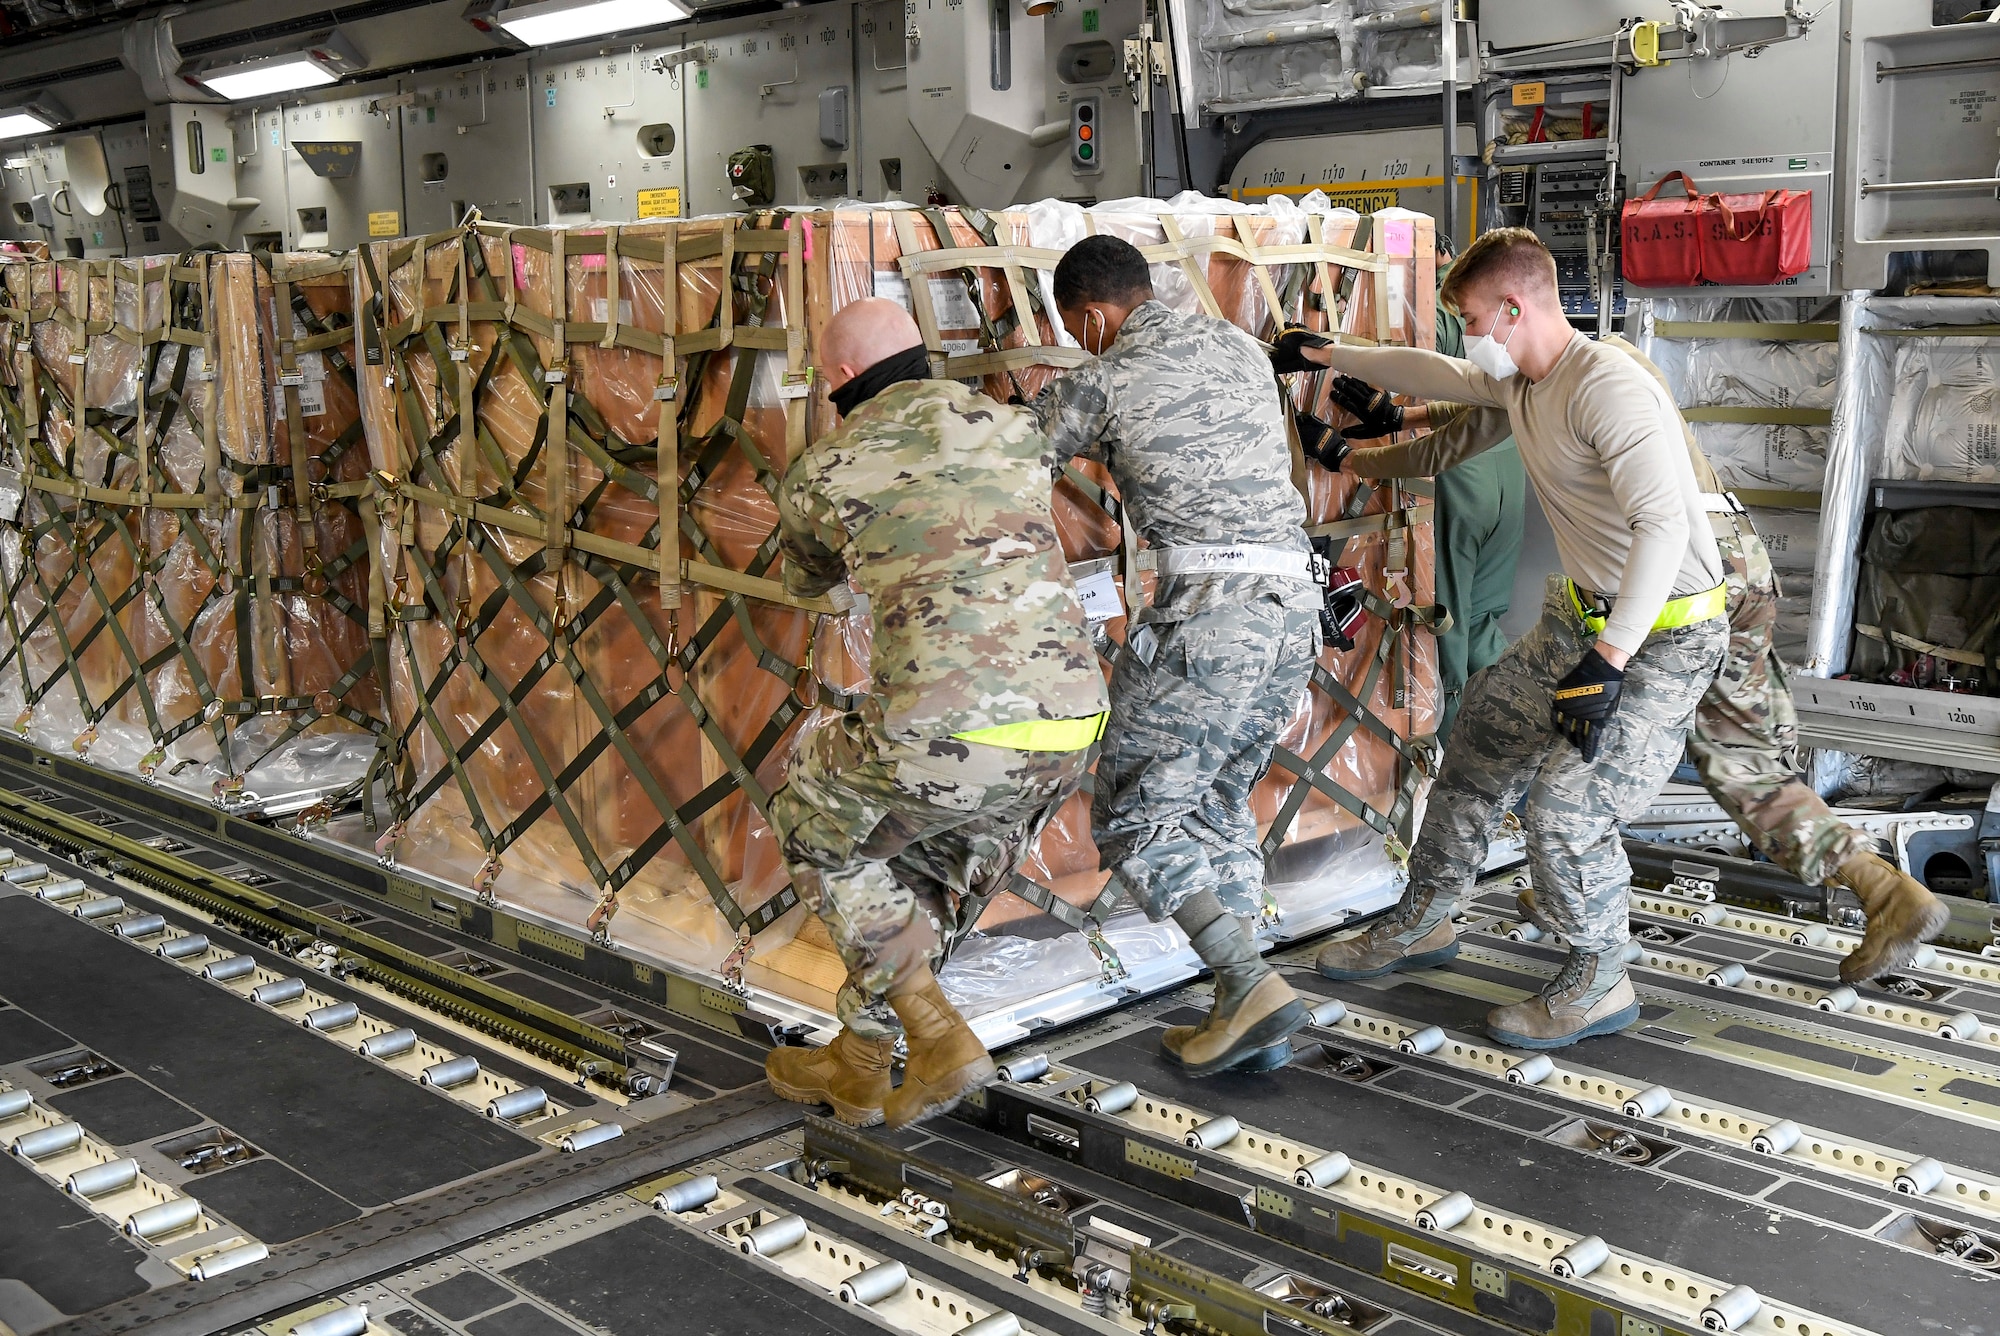 Airmen from the 436th Aerial Port Squadron load cargo onto an Indian air force C-17 Globemaster III at Dover Air Force Base, Delaware, Nov. 20, 2020. The U.S. strengthens its international partnerships through foreign military sales. Dover AFB actively supports $3.5 billion worth of FMS due to its strategic location and 436th Aerial Port Squadron, the largest aerial port in the Department of Defense. As the world’s oldest and largest democracies, the United States and India share a commitment to freedom, human rights and rule of law. (U.S. Air Force photo by Senior Airman Christopher Quail)